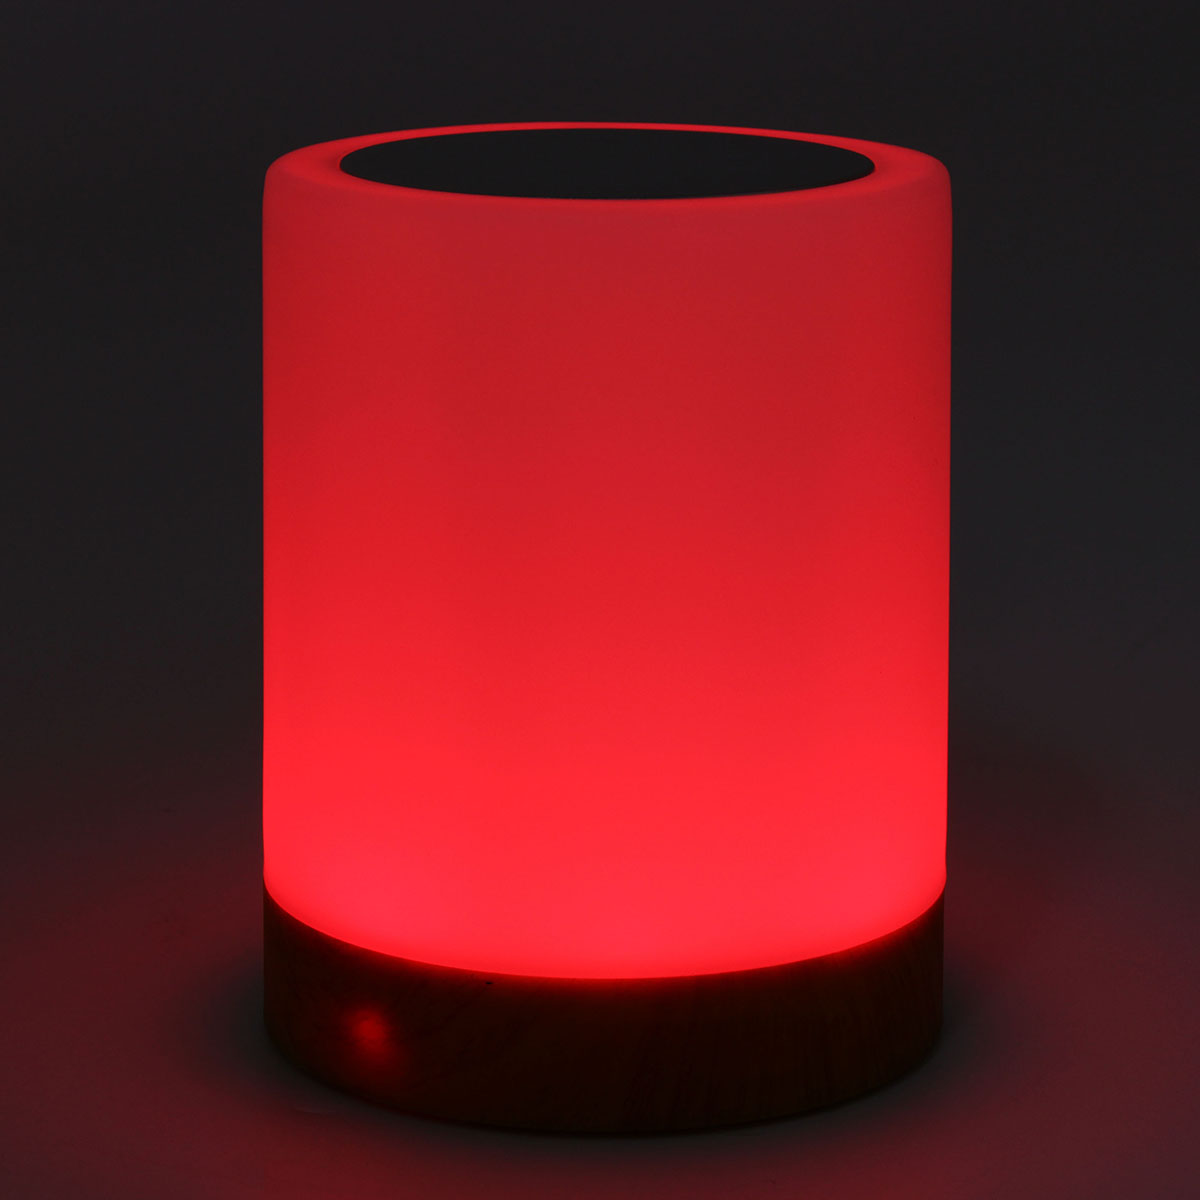 Dimmable-Touch-LED-Night-Light-USB-Charging-Colorful-Bedroom-Table-Lamp-Decor-Children-Gift-1689743-7